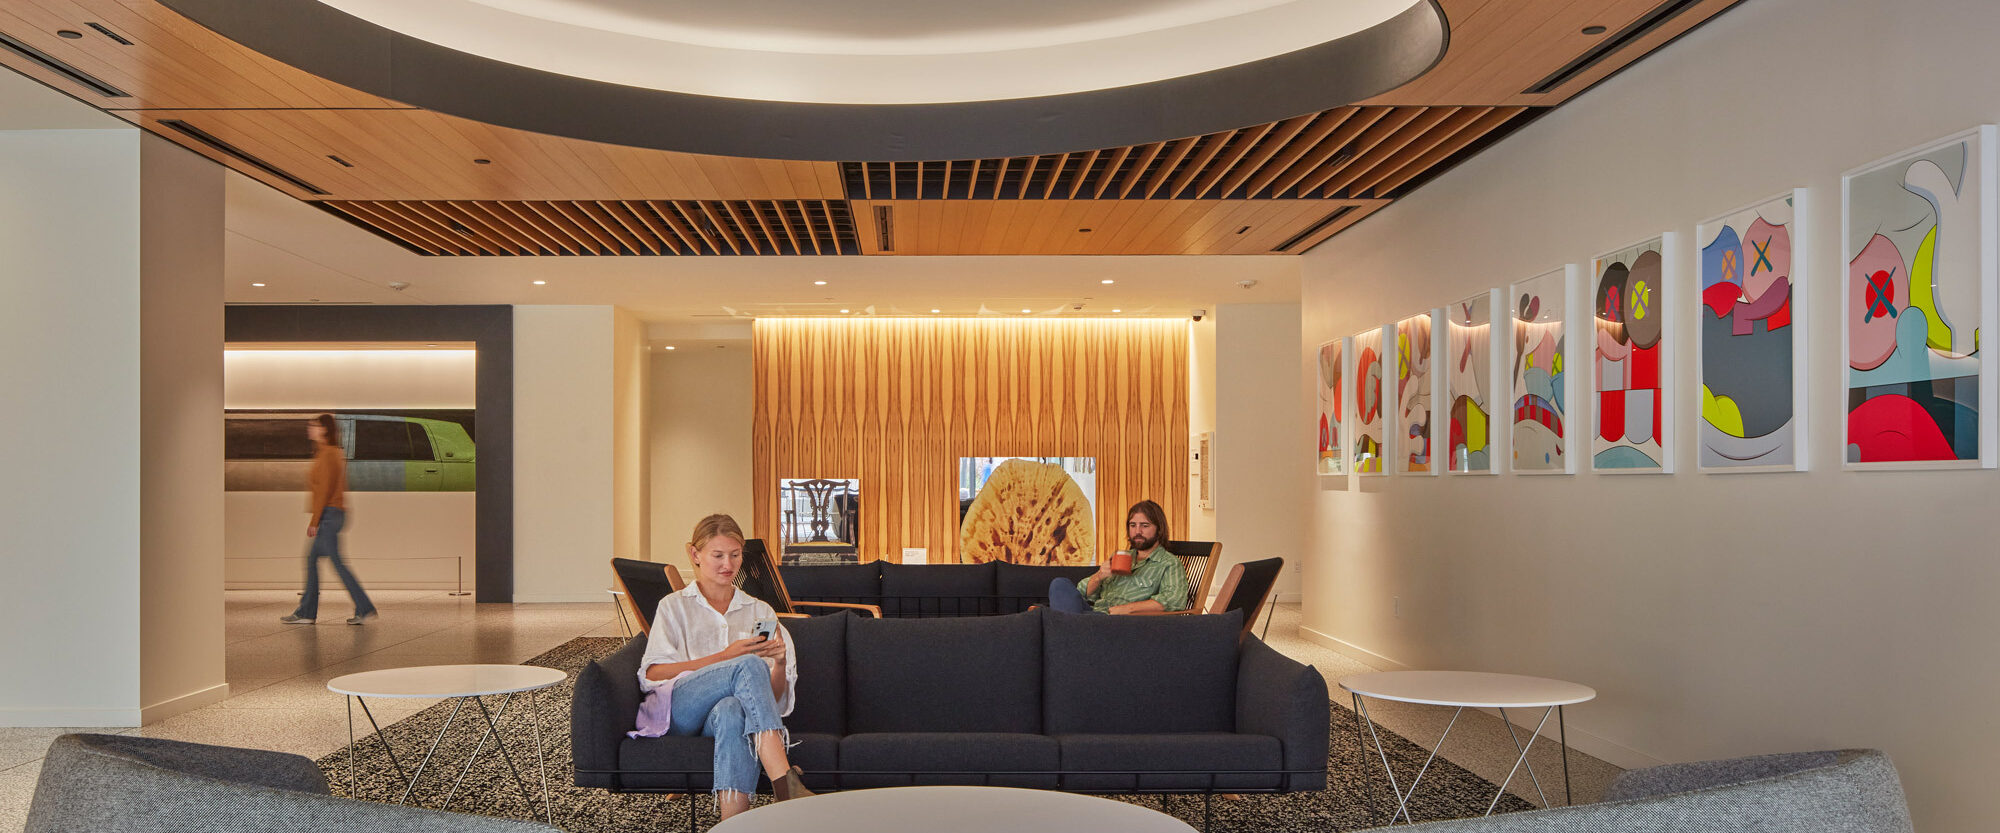 Modern lobby with a concentric circular ceiling feature, wood slat accents, and a central seating area with a sleek sectional sofa, accompanied by a dog and two people engaged in relaxation. Vibrant artwork adds a pop of color to the serene, neutral-toned space.